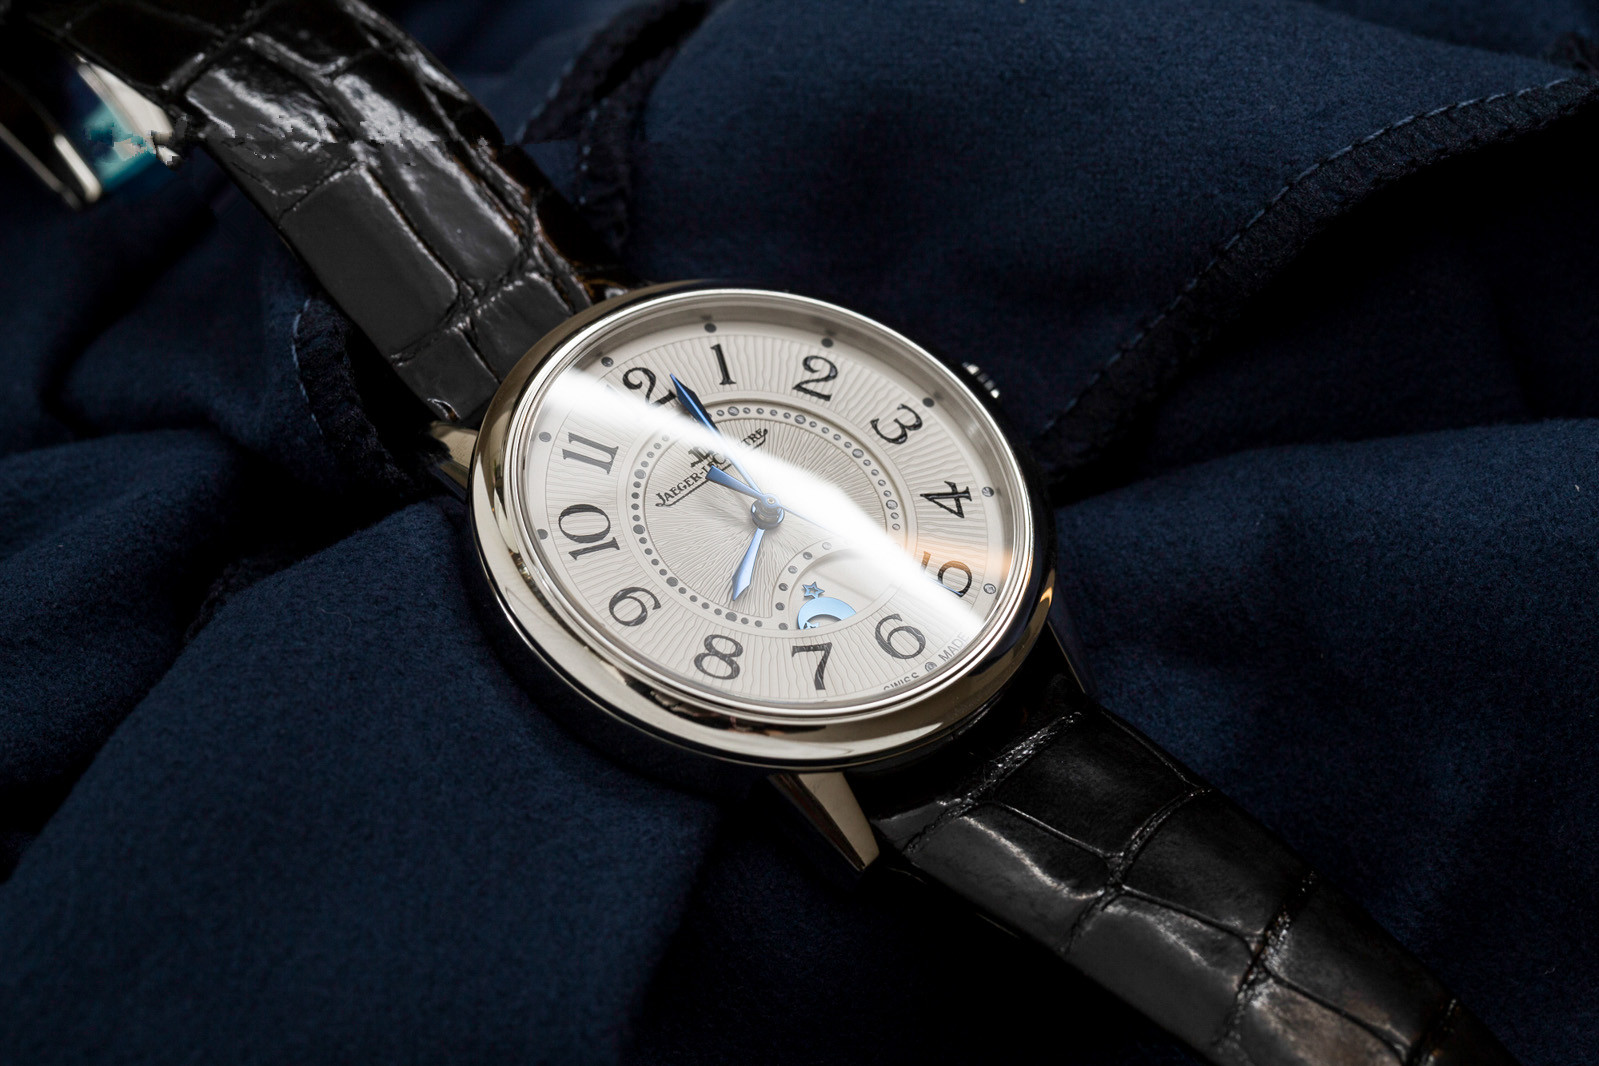 Jager-LeCoultre replica watches with white dials are in high quality.